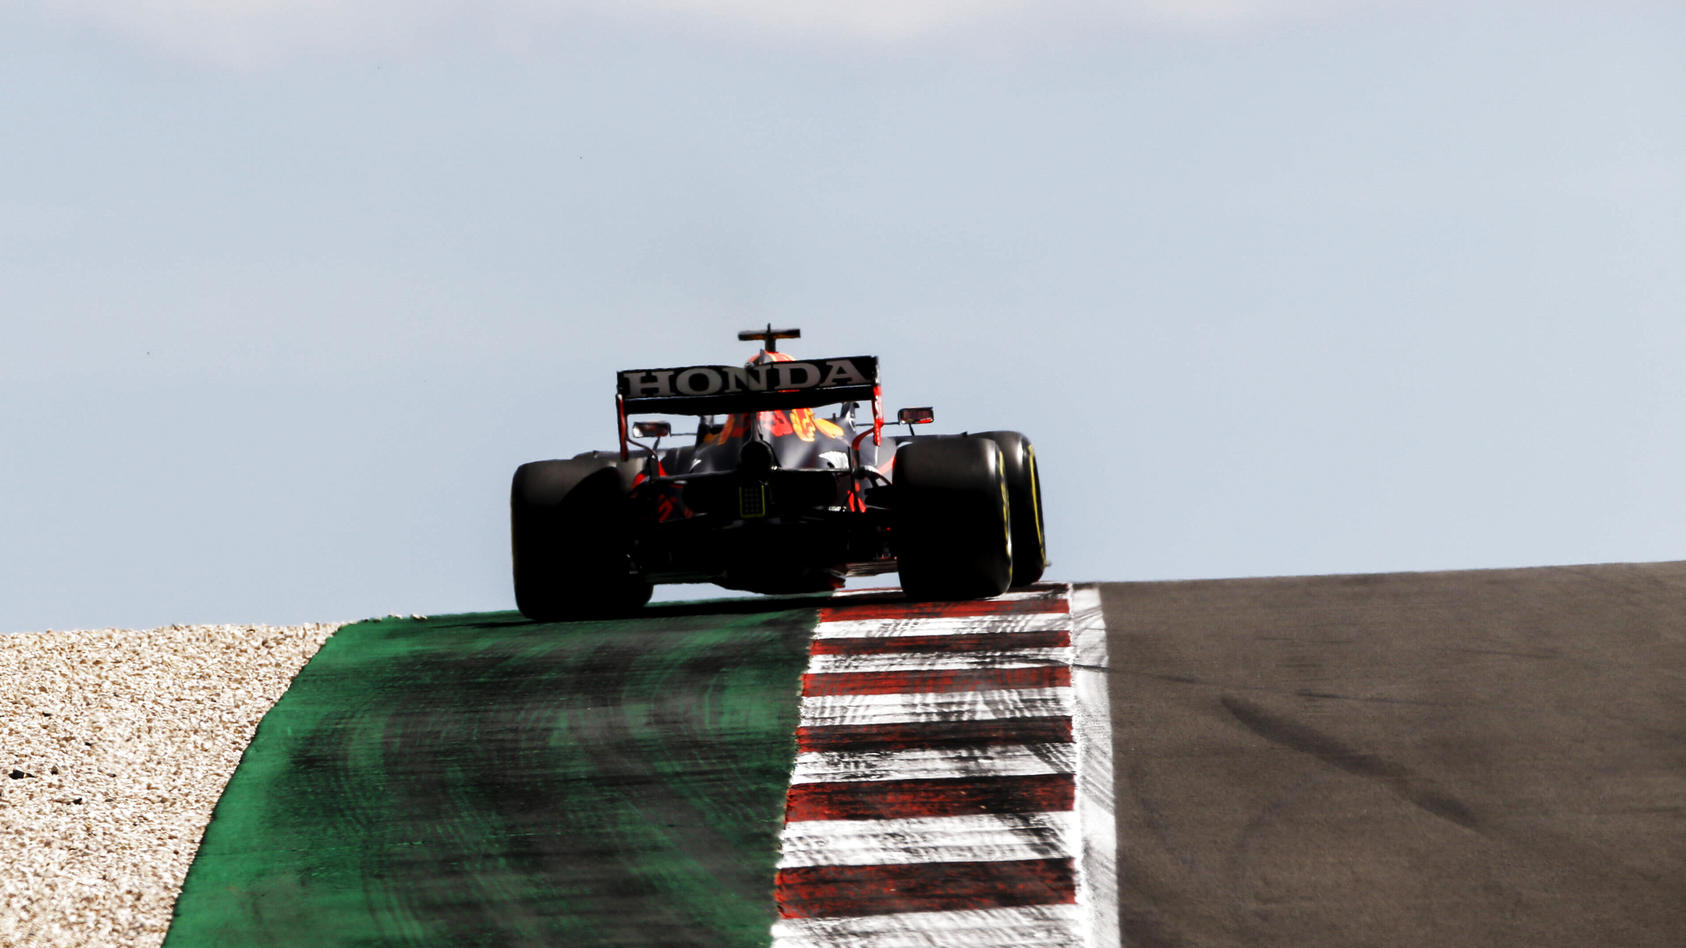  33 Max Verstappen NED, Red Bull Racing, F1 Grand Prix of Portugal at Autodromo Internacional do Algarve on May 1, 2021 in Portimao, Portugal. Photo by HOCH ZWEI Portimao Portugal *** 33 Max Verstappen NED, Red Bull Racing , F1 Grand Prix of Portugal